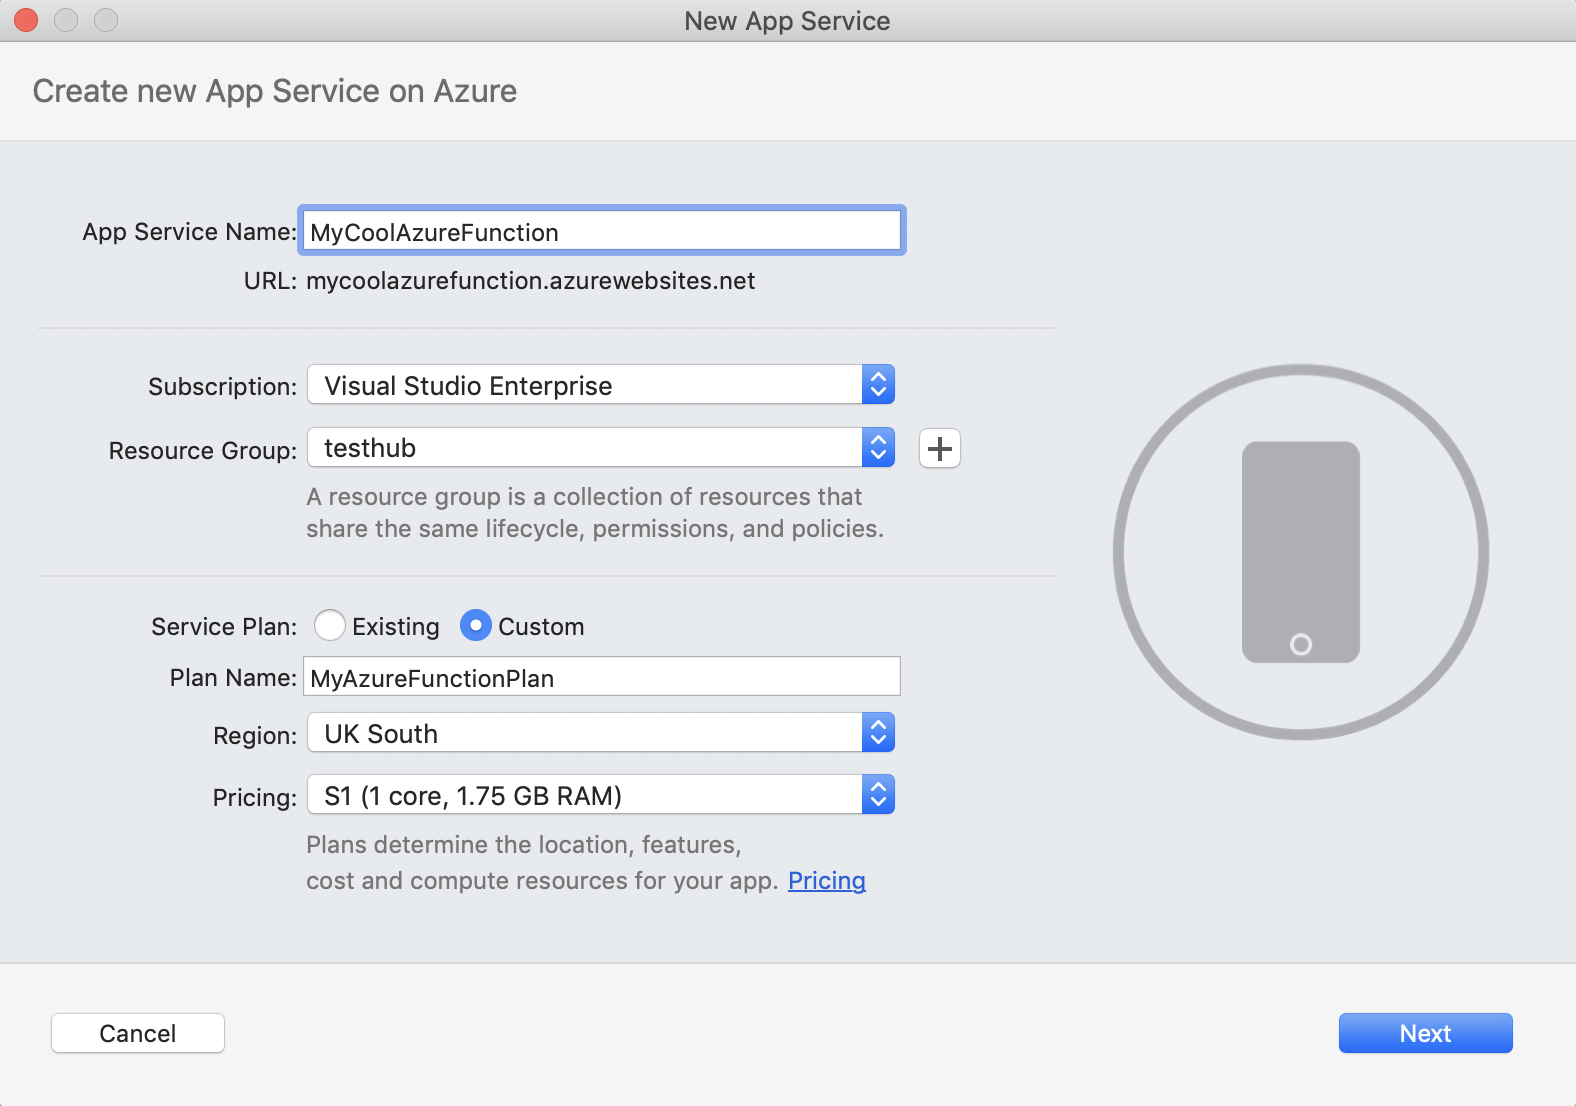 New App Service dialog, with fields for service name, subscription, resource group, and service plan settings.